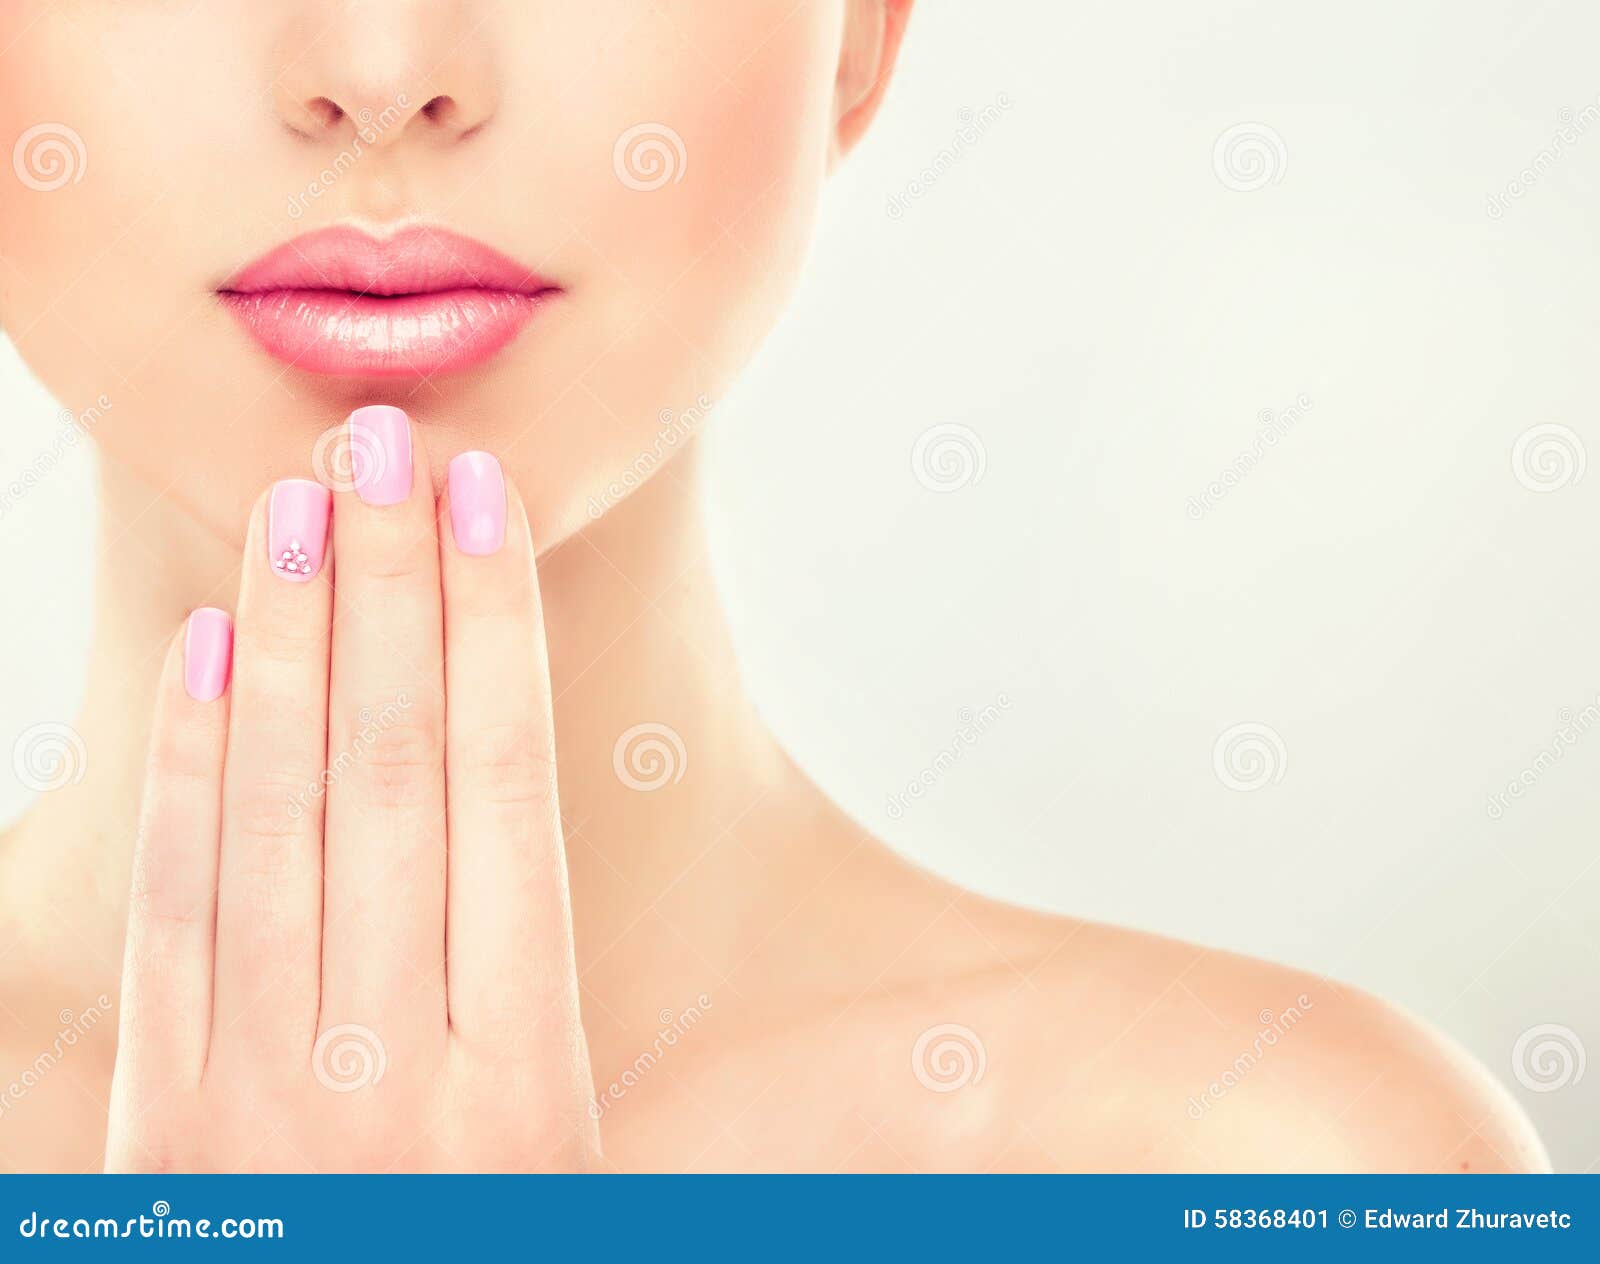 beautiful girl with pink manicure